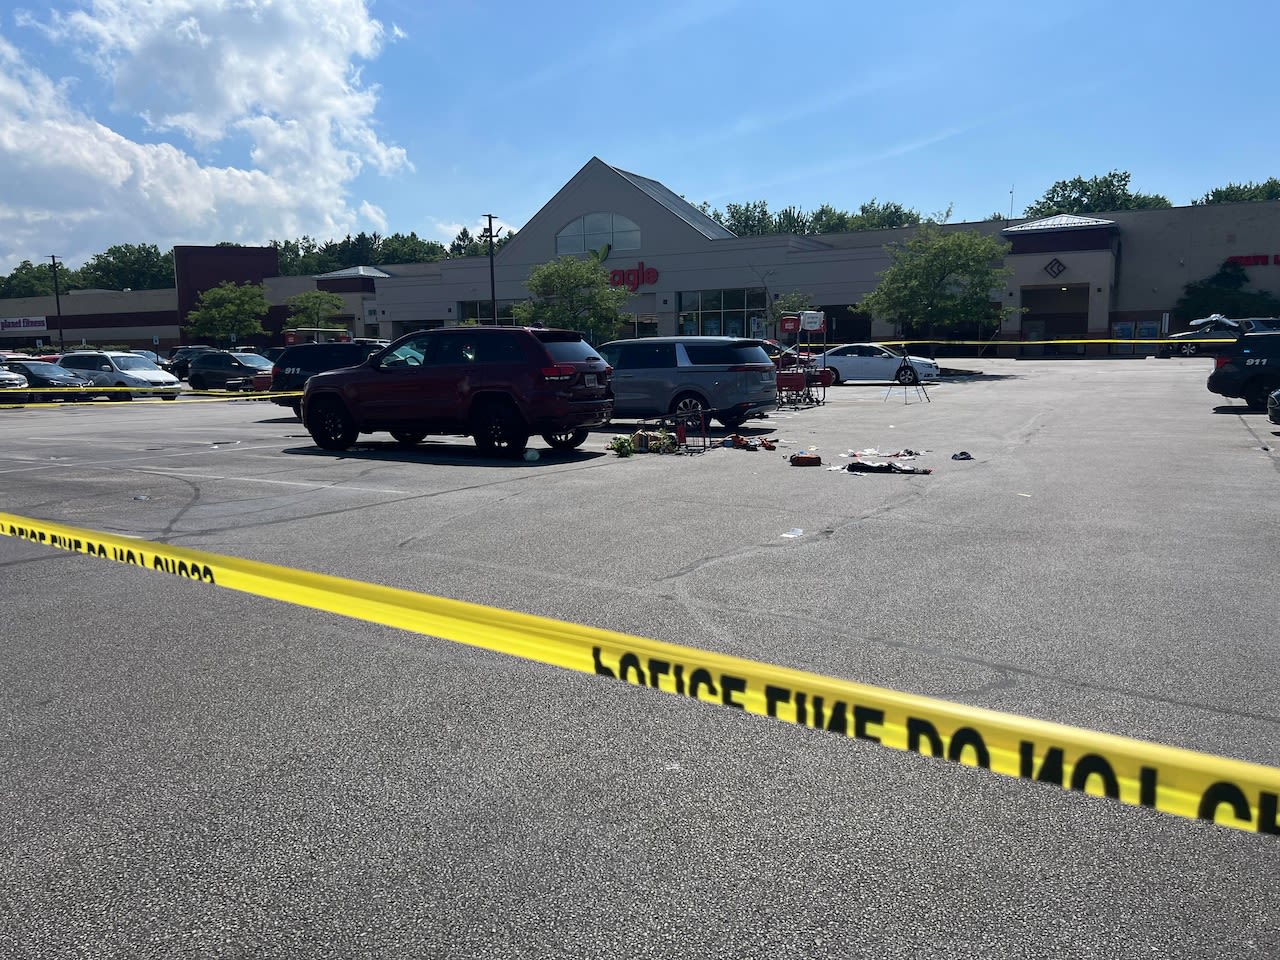 Toddler, woman stabbed in parking lot of Giant Eagle in North Olmsted